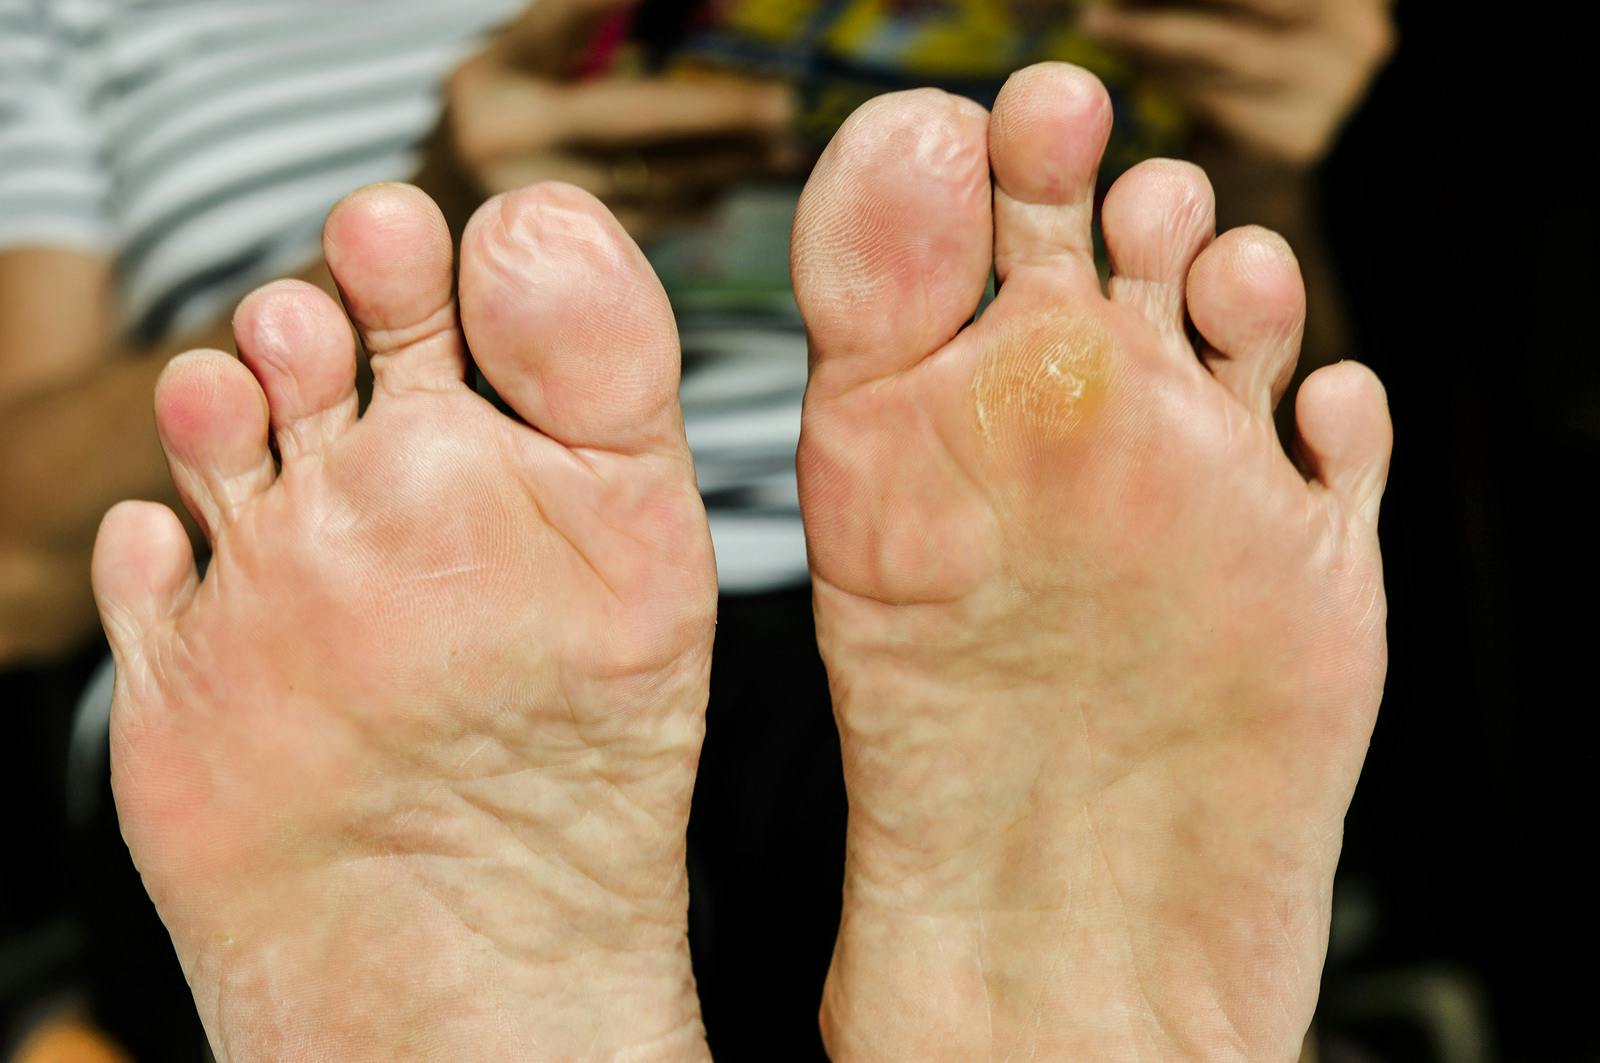 treatment with salicylic acid to banish plantar warts on the soles of two feet